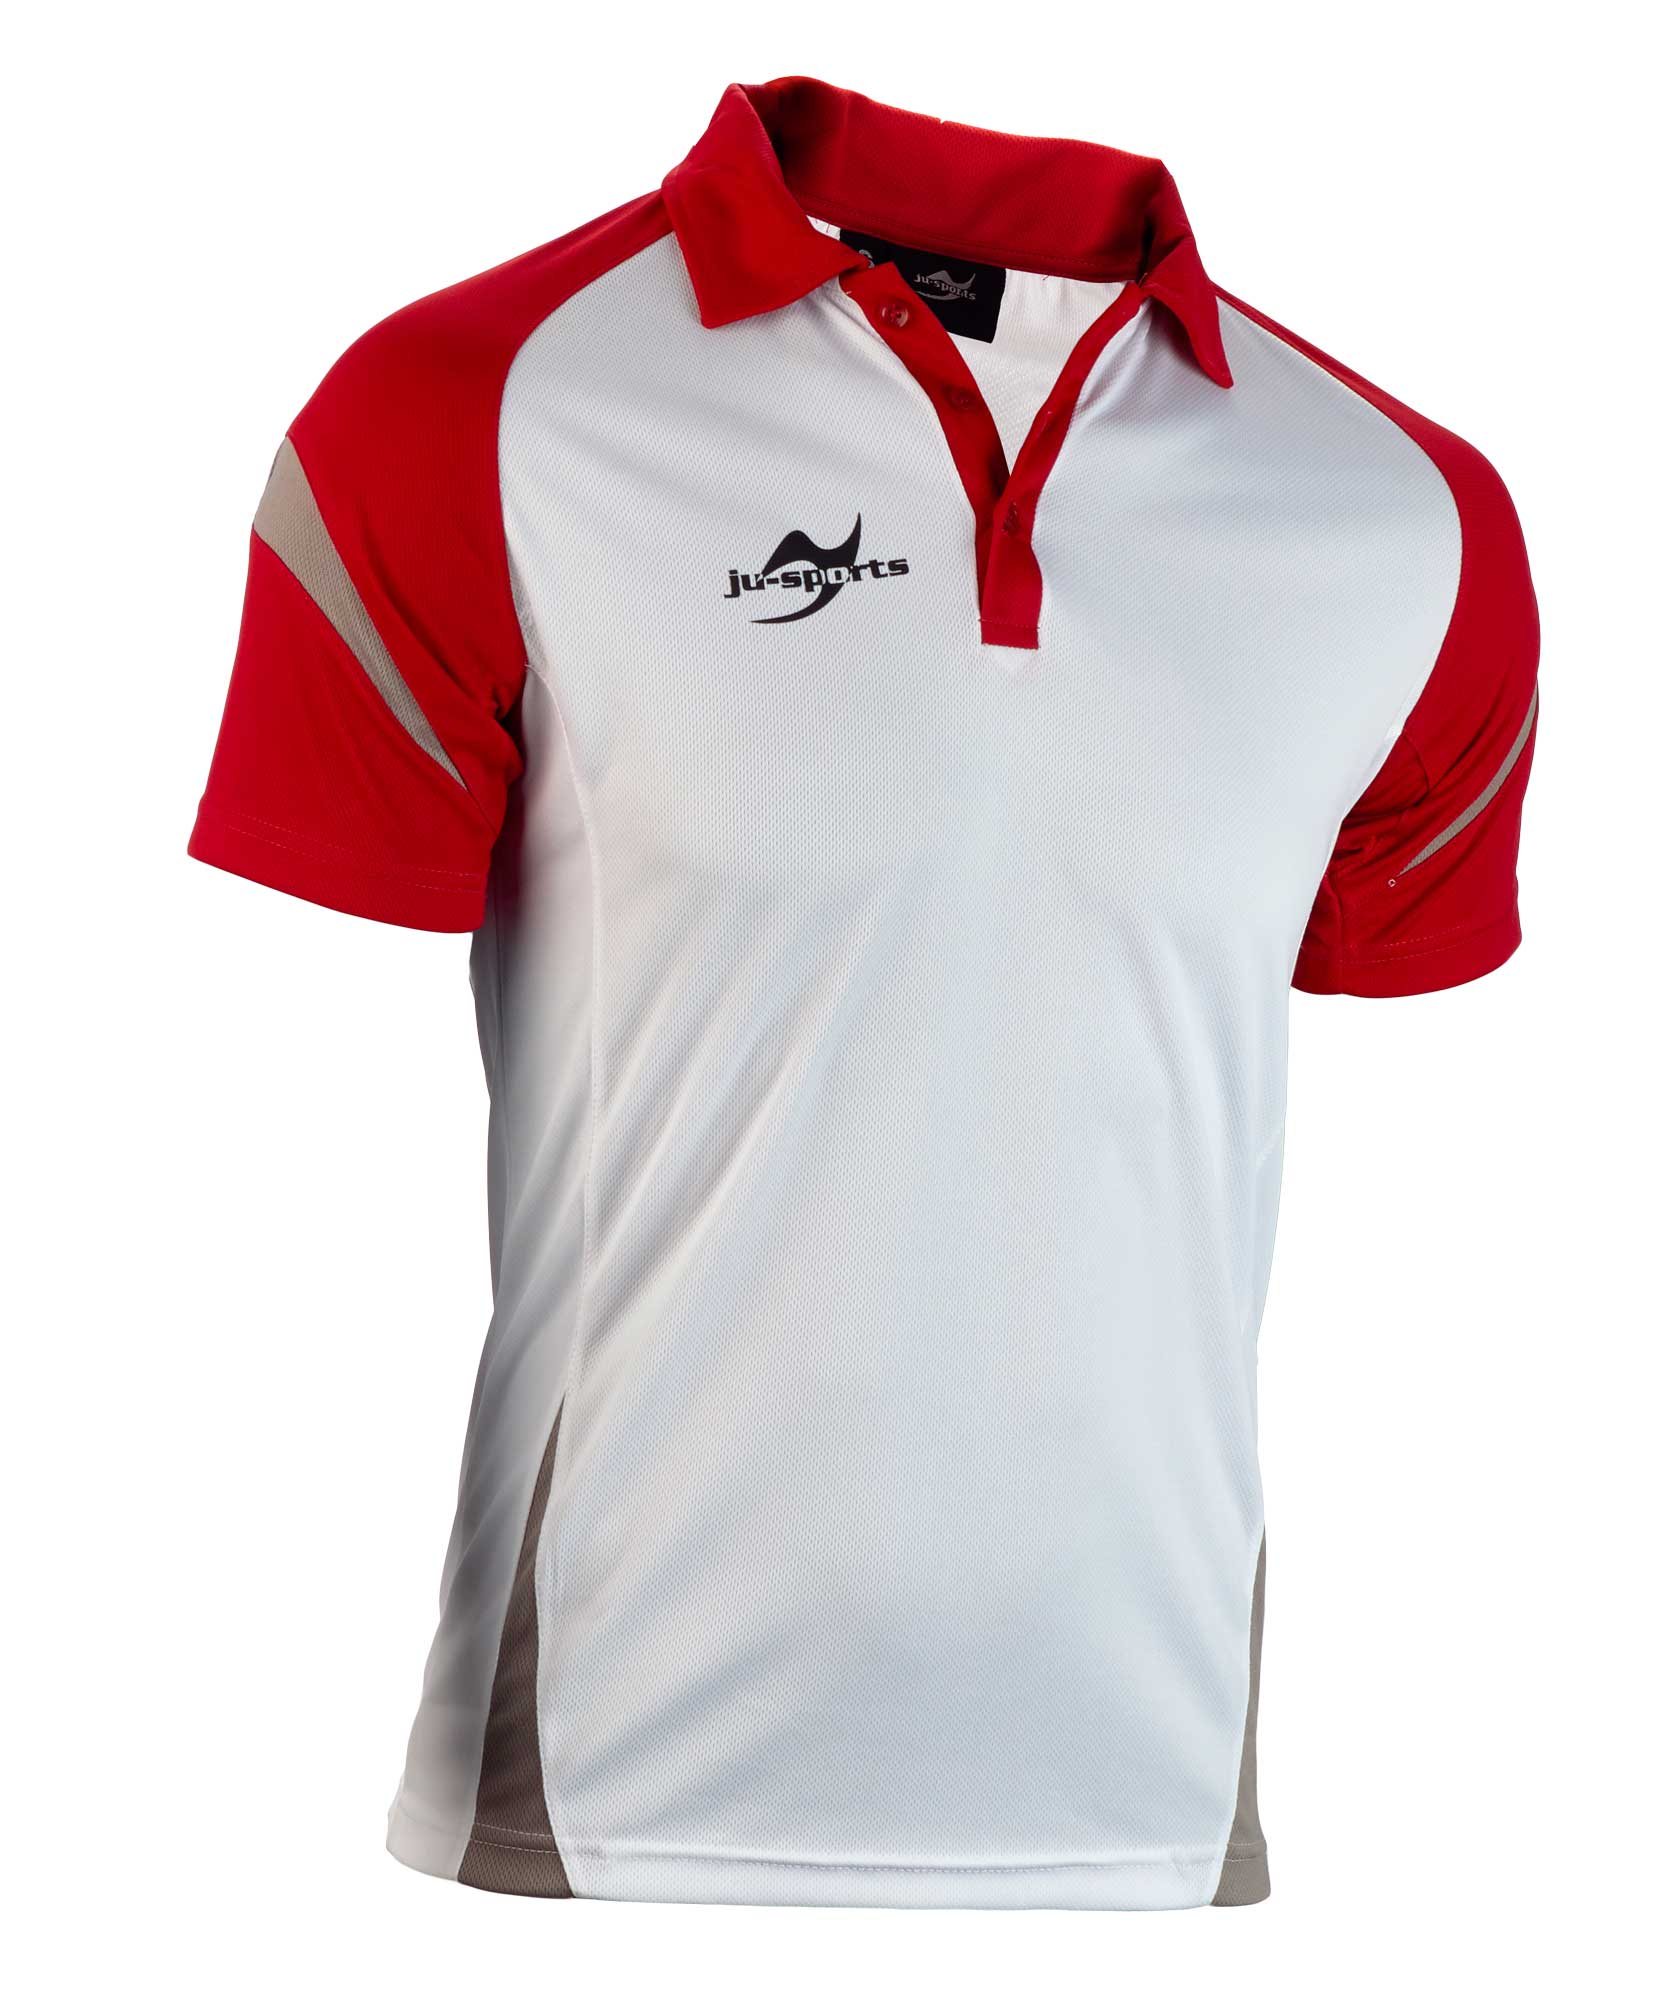 Ju-Sports Element C2 Polo white/red